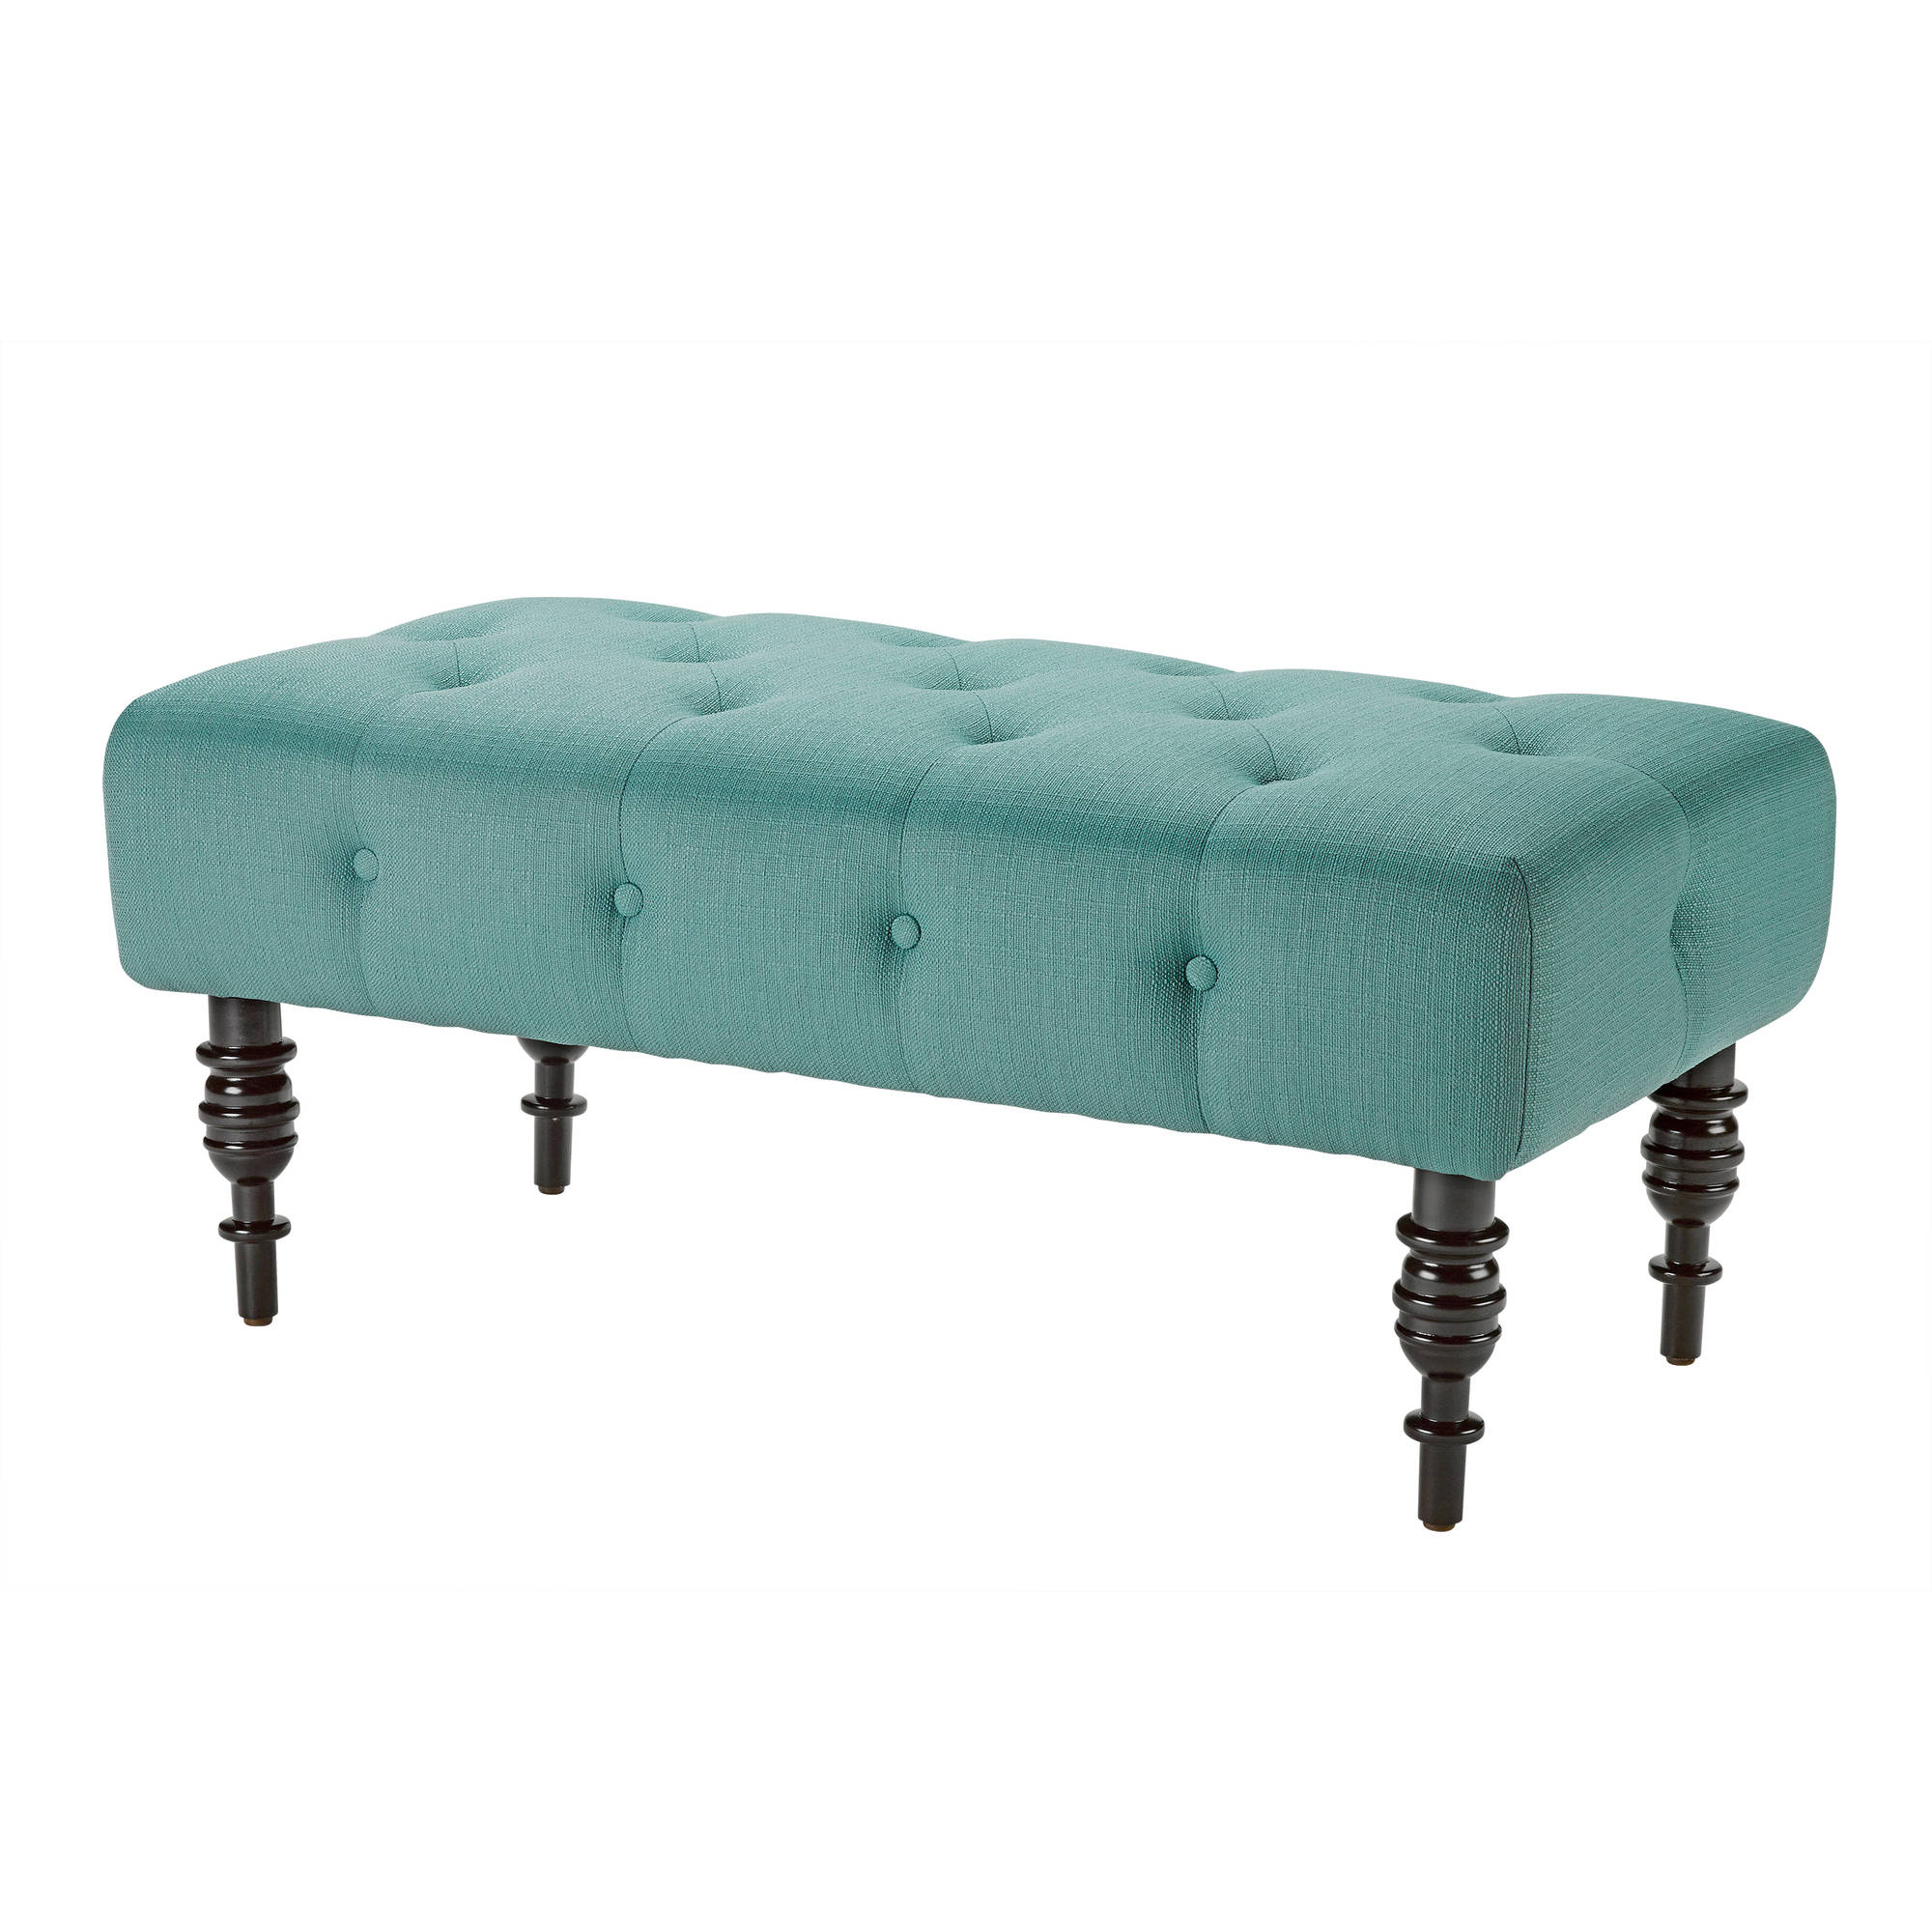 Better Homes and Gardens Traditional Tufted Bench with Turned Wood Legs, Multiple Finishes - image 1 of 3